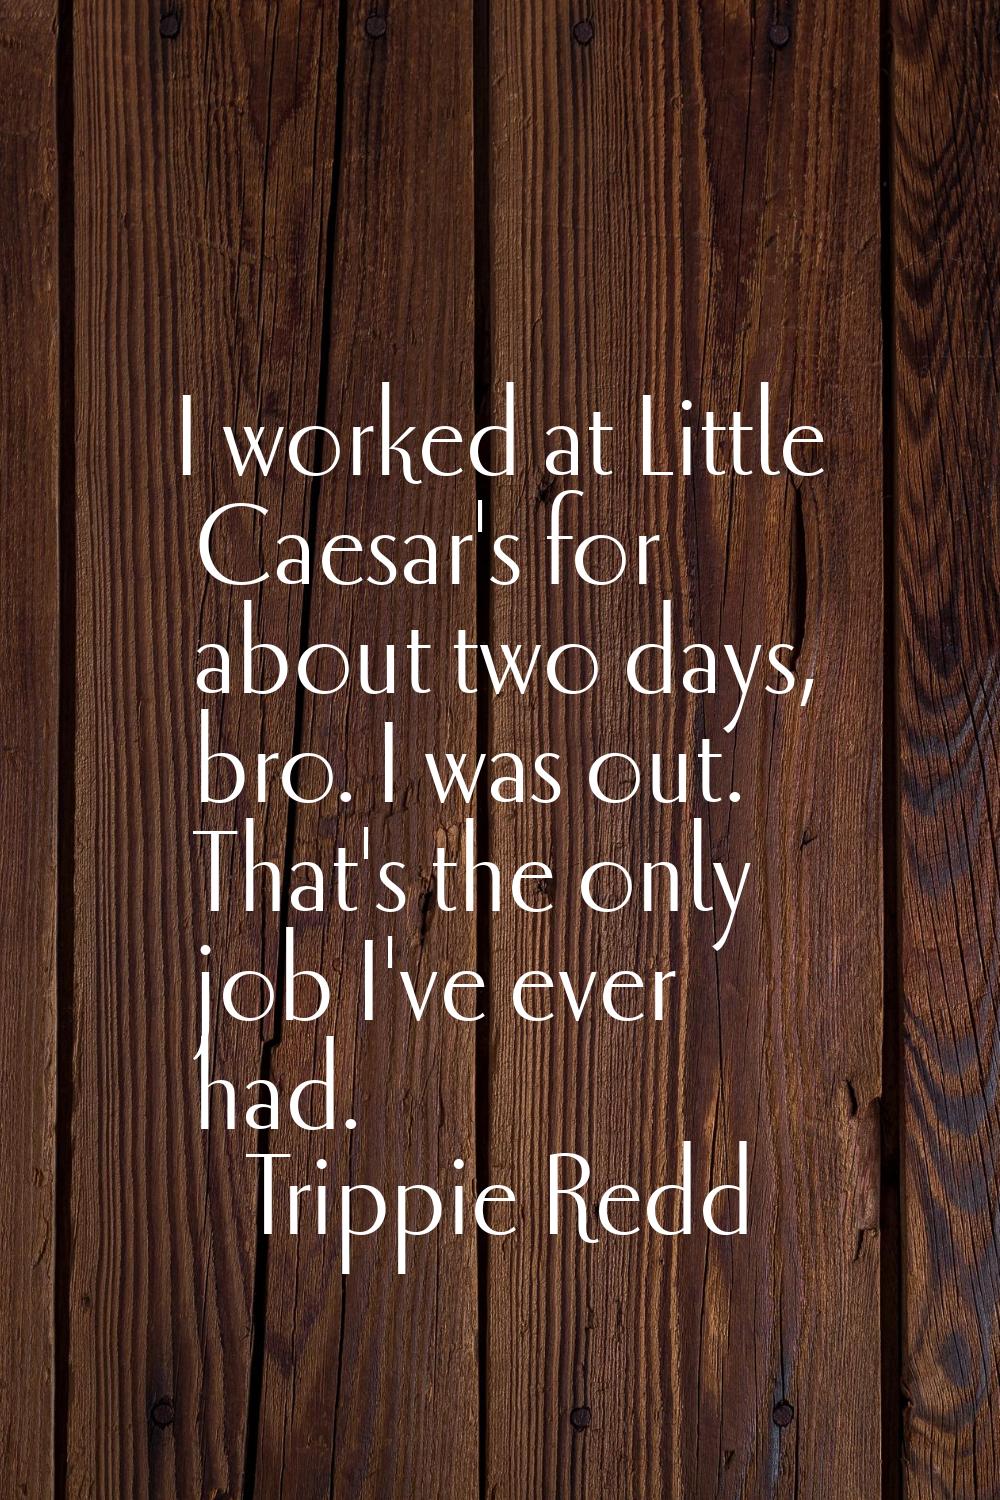 I worked at Little Caesar's for about two days, bro. I was out. That's the only job I've ever had.